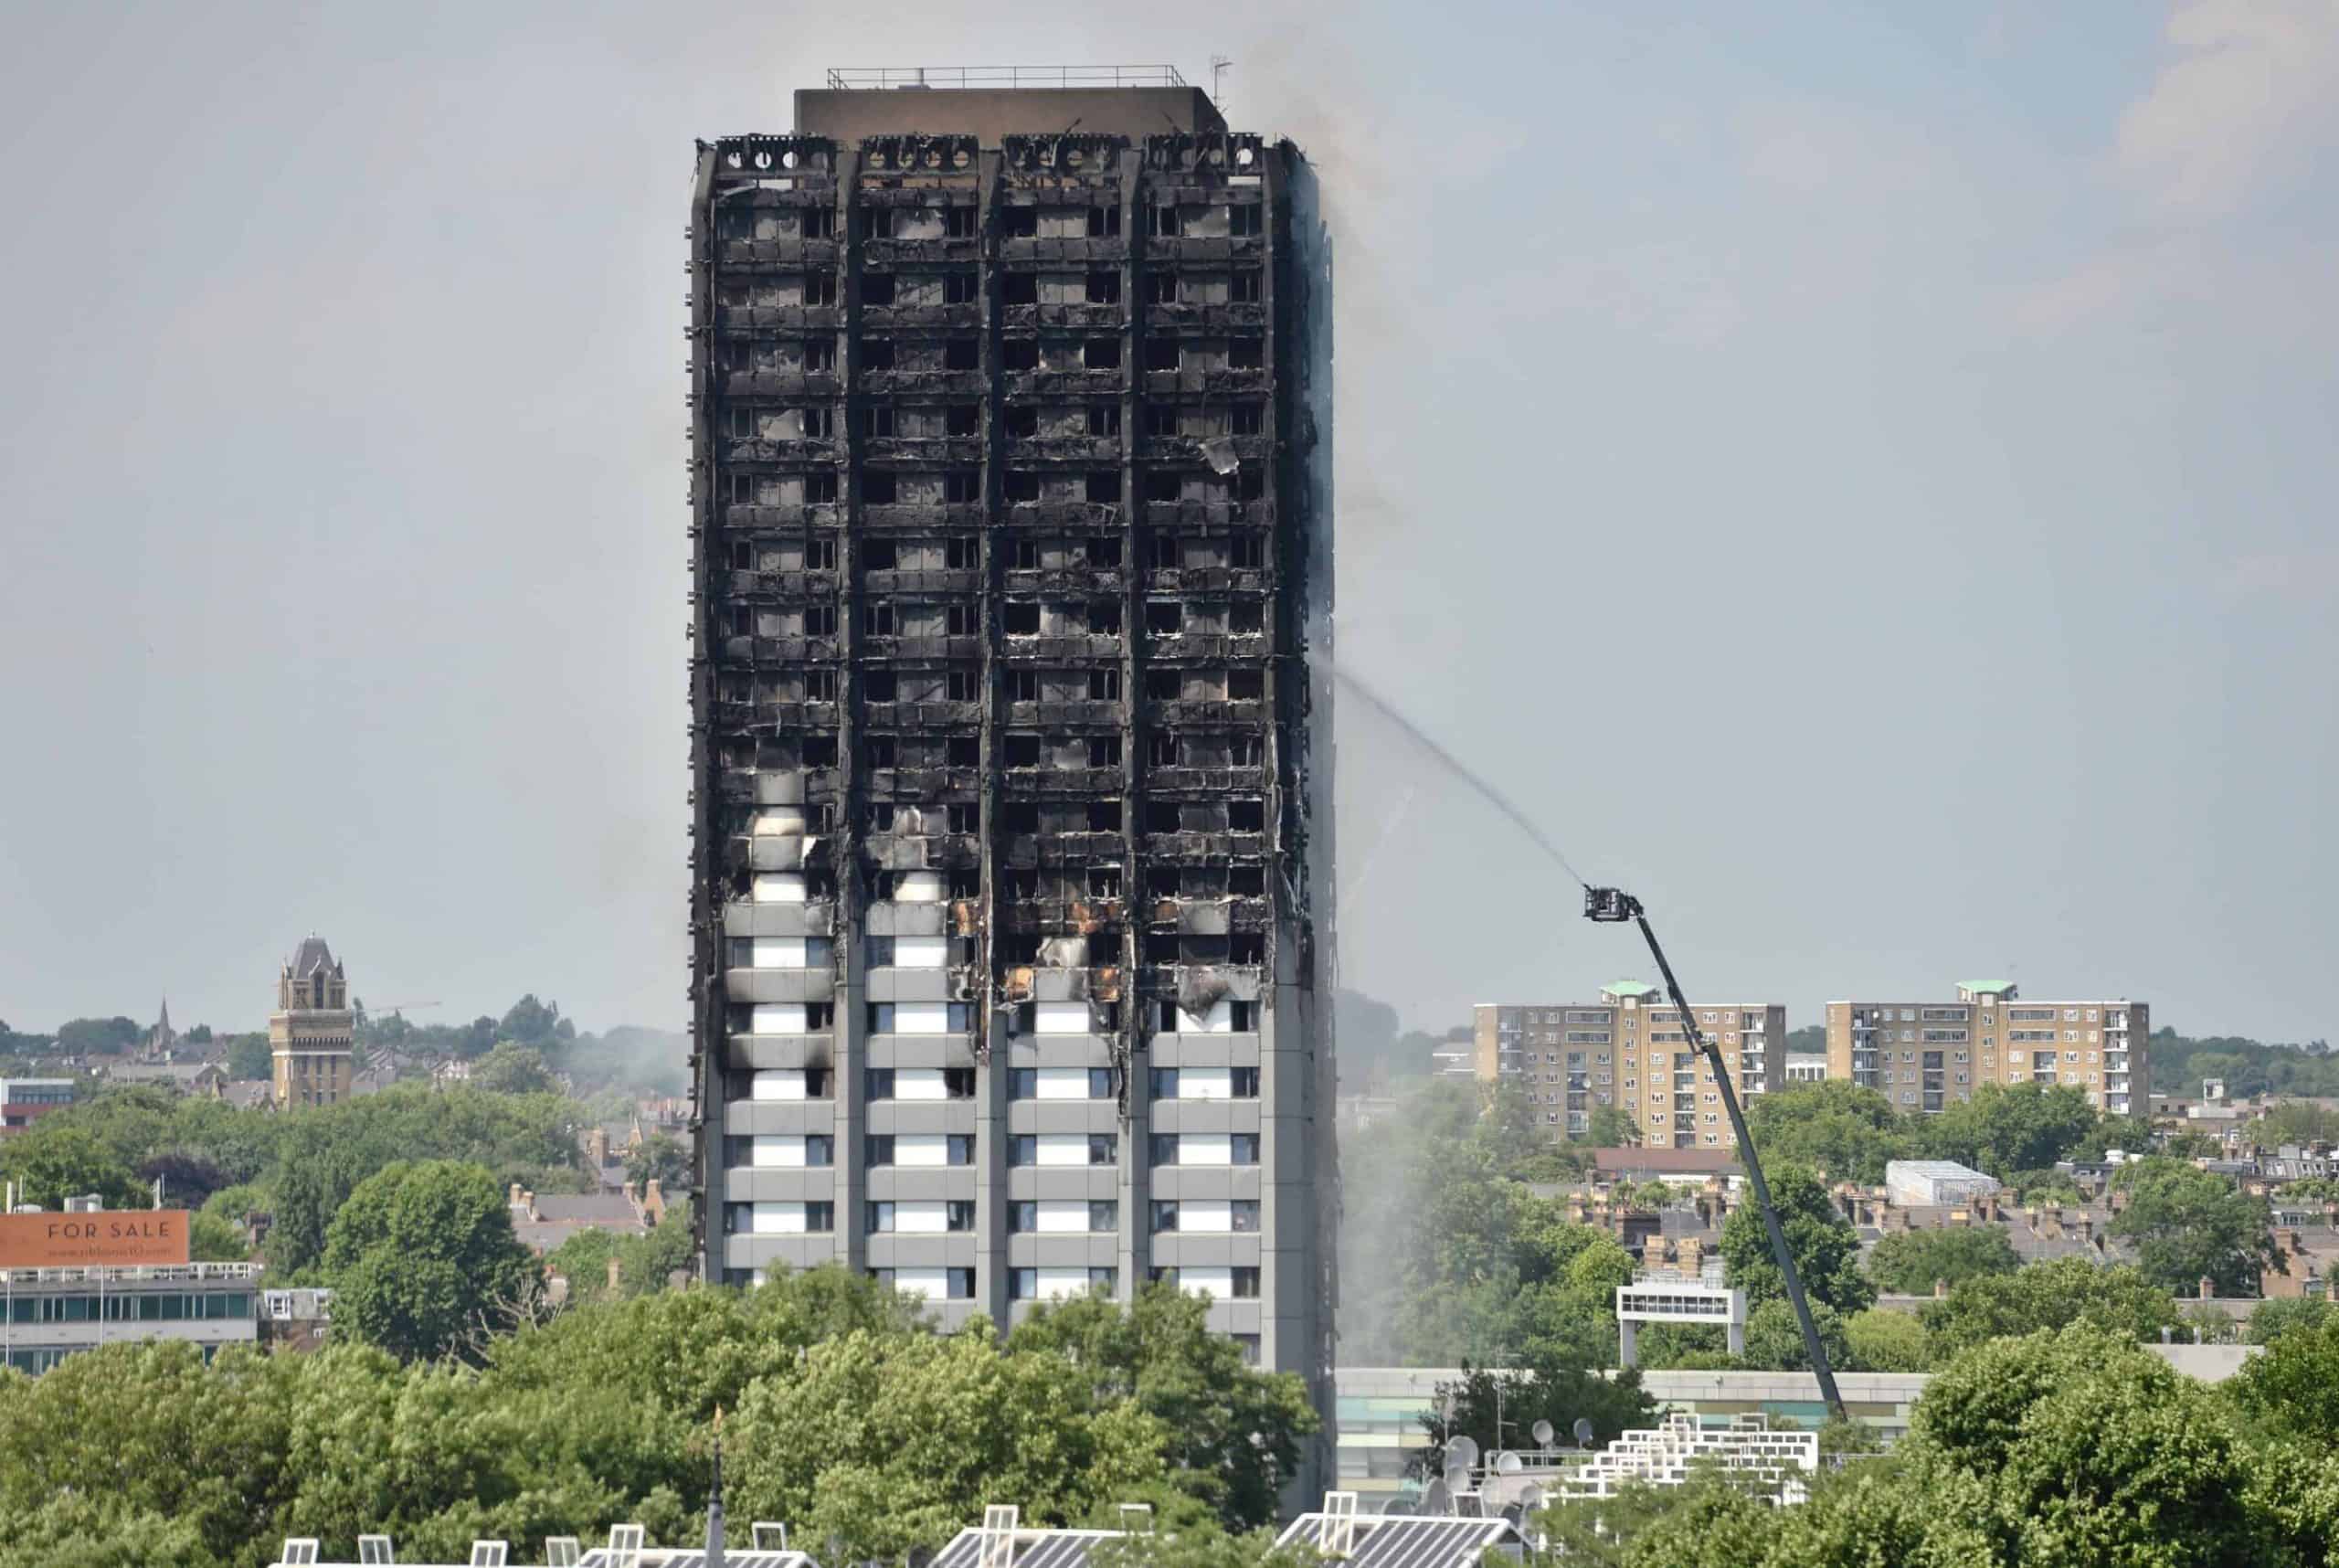 Grenfell refurbishment firms expressed no trace of responsibility, inquiry told